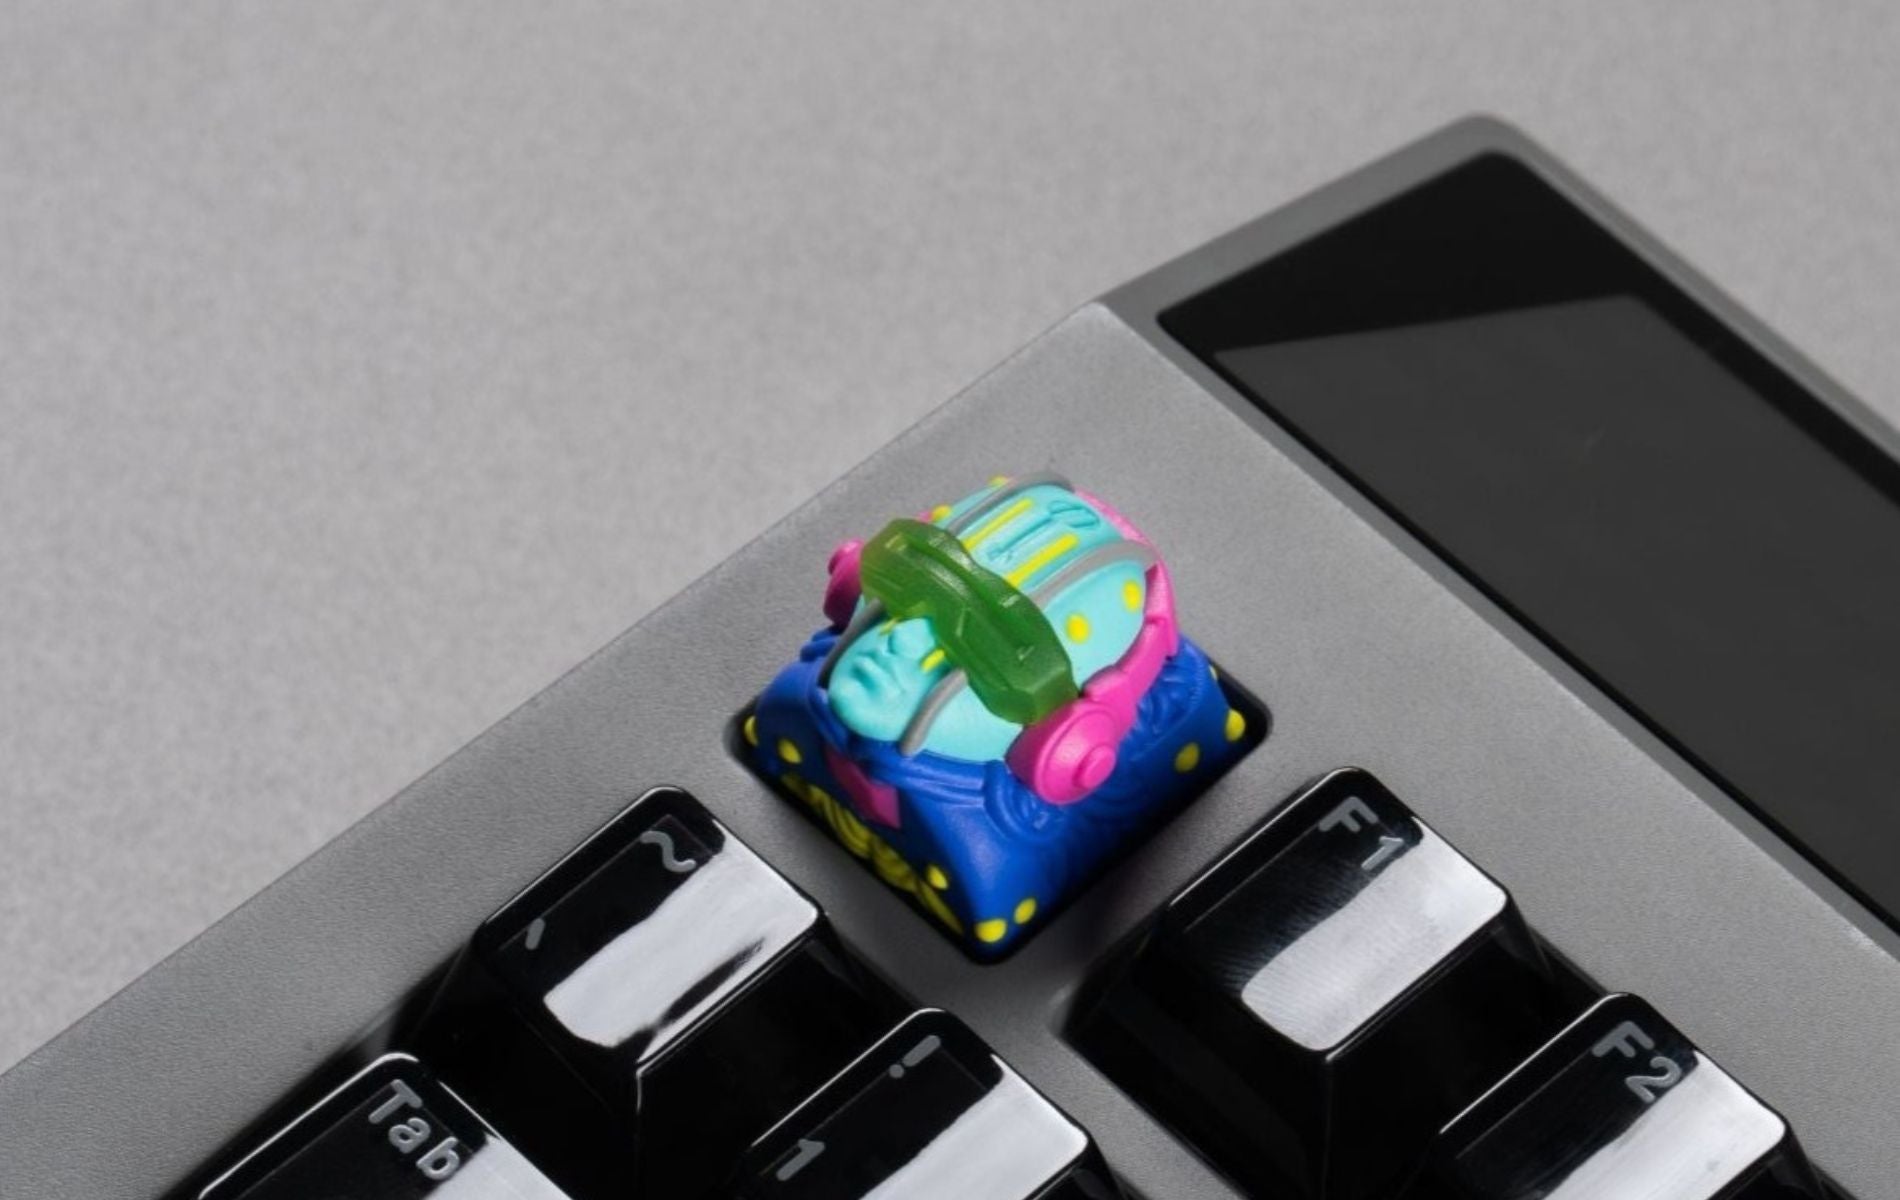 Hot Keys Project x AM "STAND BY ME" Artisan Keycap